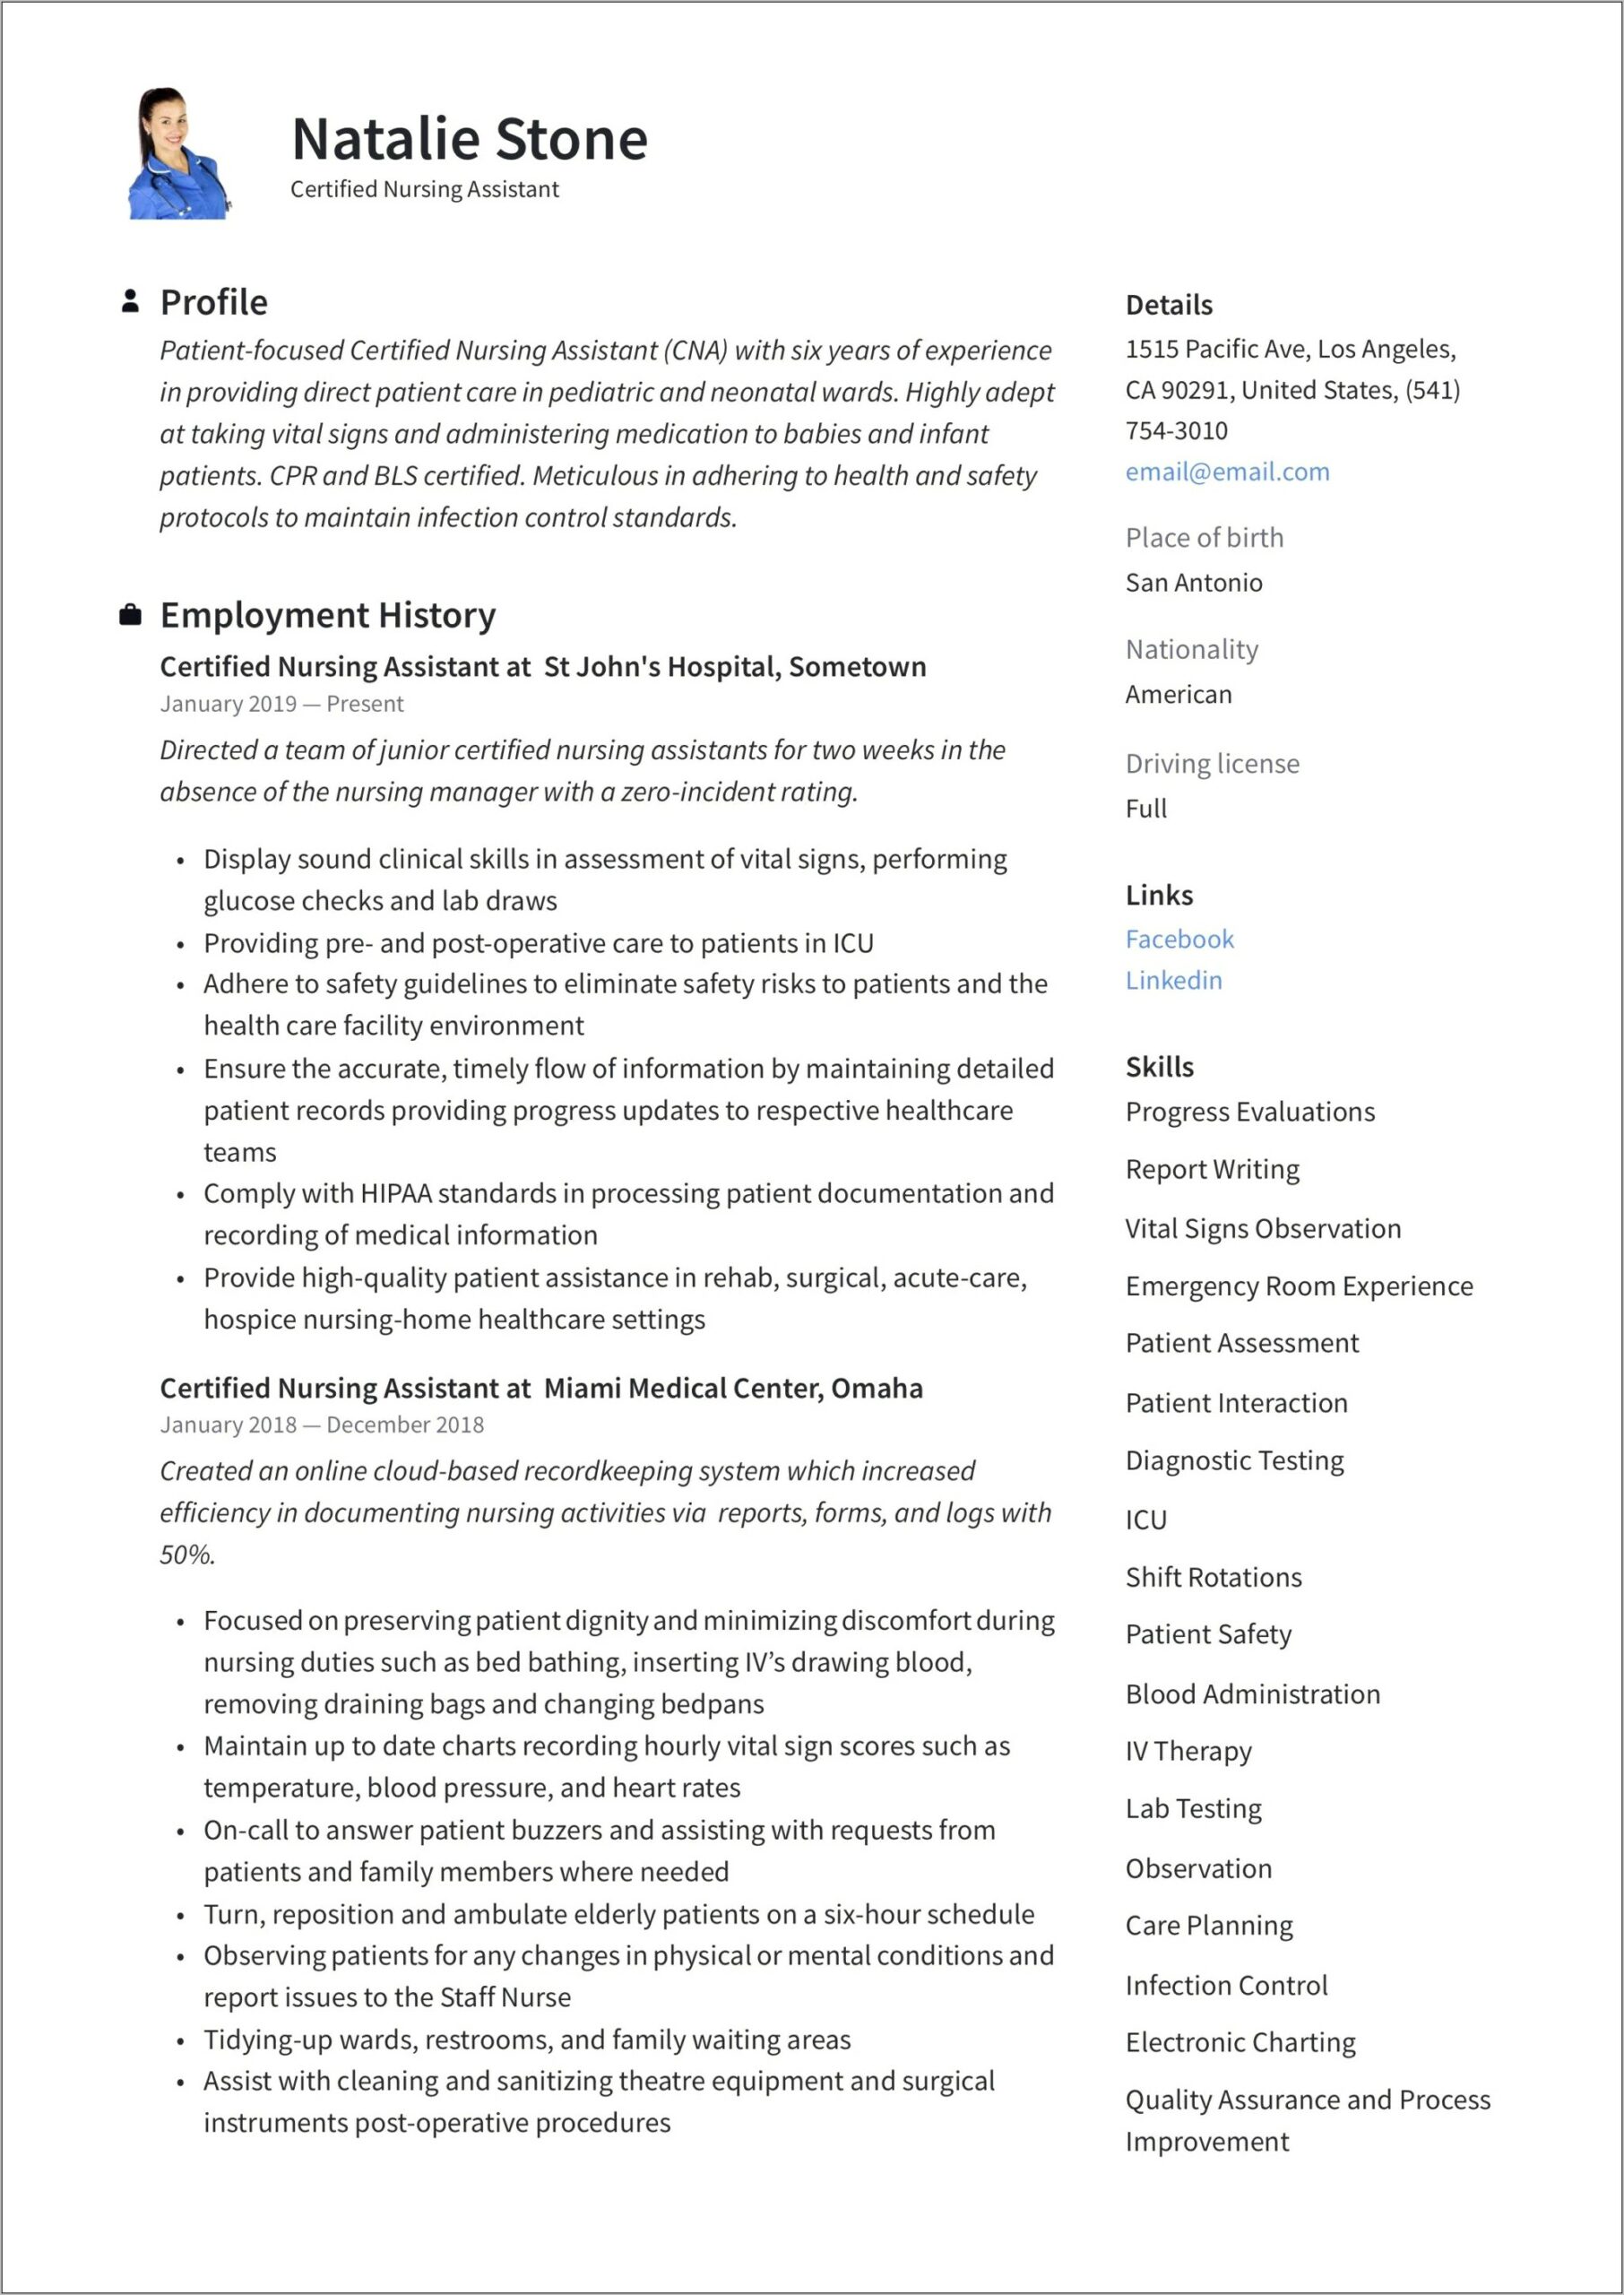 Nursing Assistant Resume Skills And Abilities